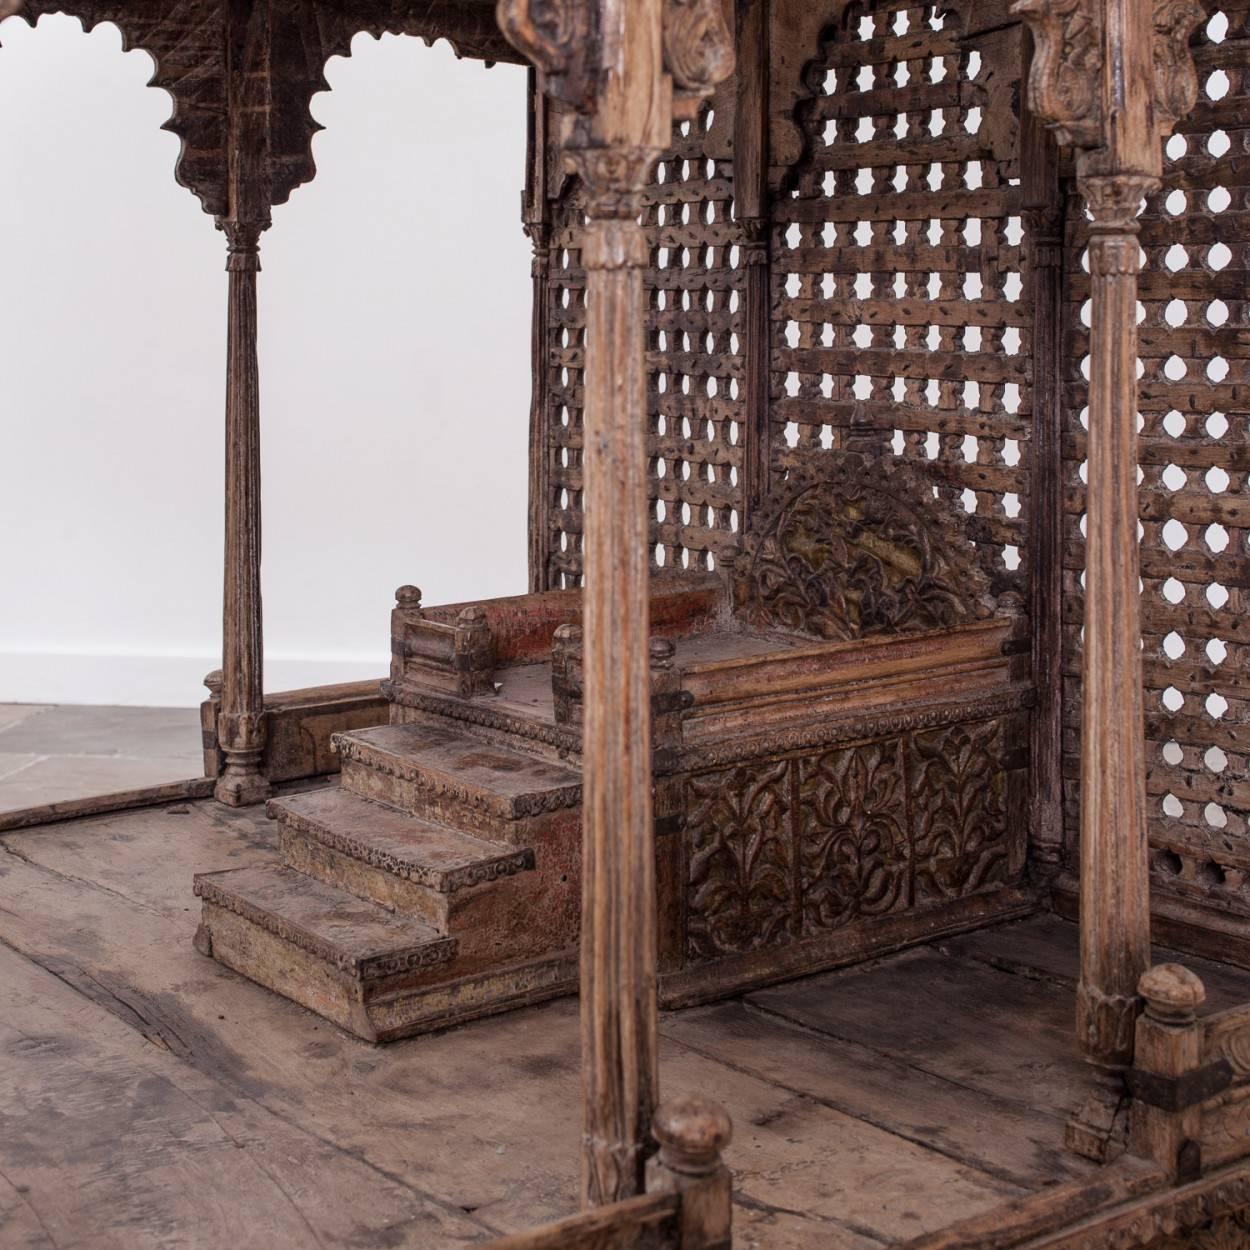 A very rare miniature temple from the Rajasthan province. It dates from the late 18th or early 19th century.

This shrine may have been created for a Hindu potentate or rich merchant, which would have resided in a room within their palace and set